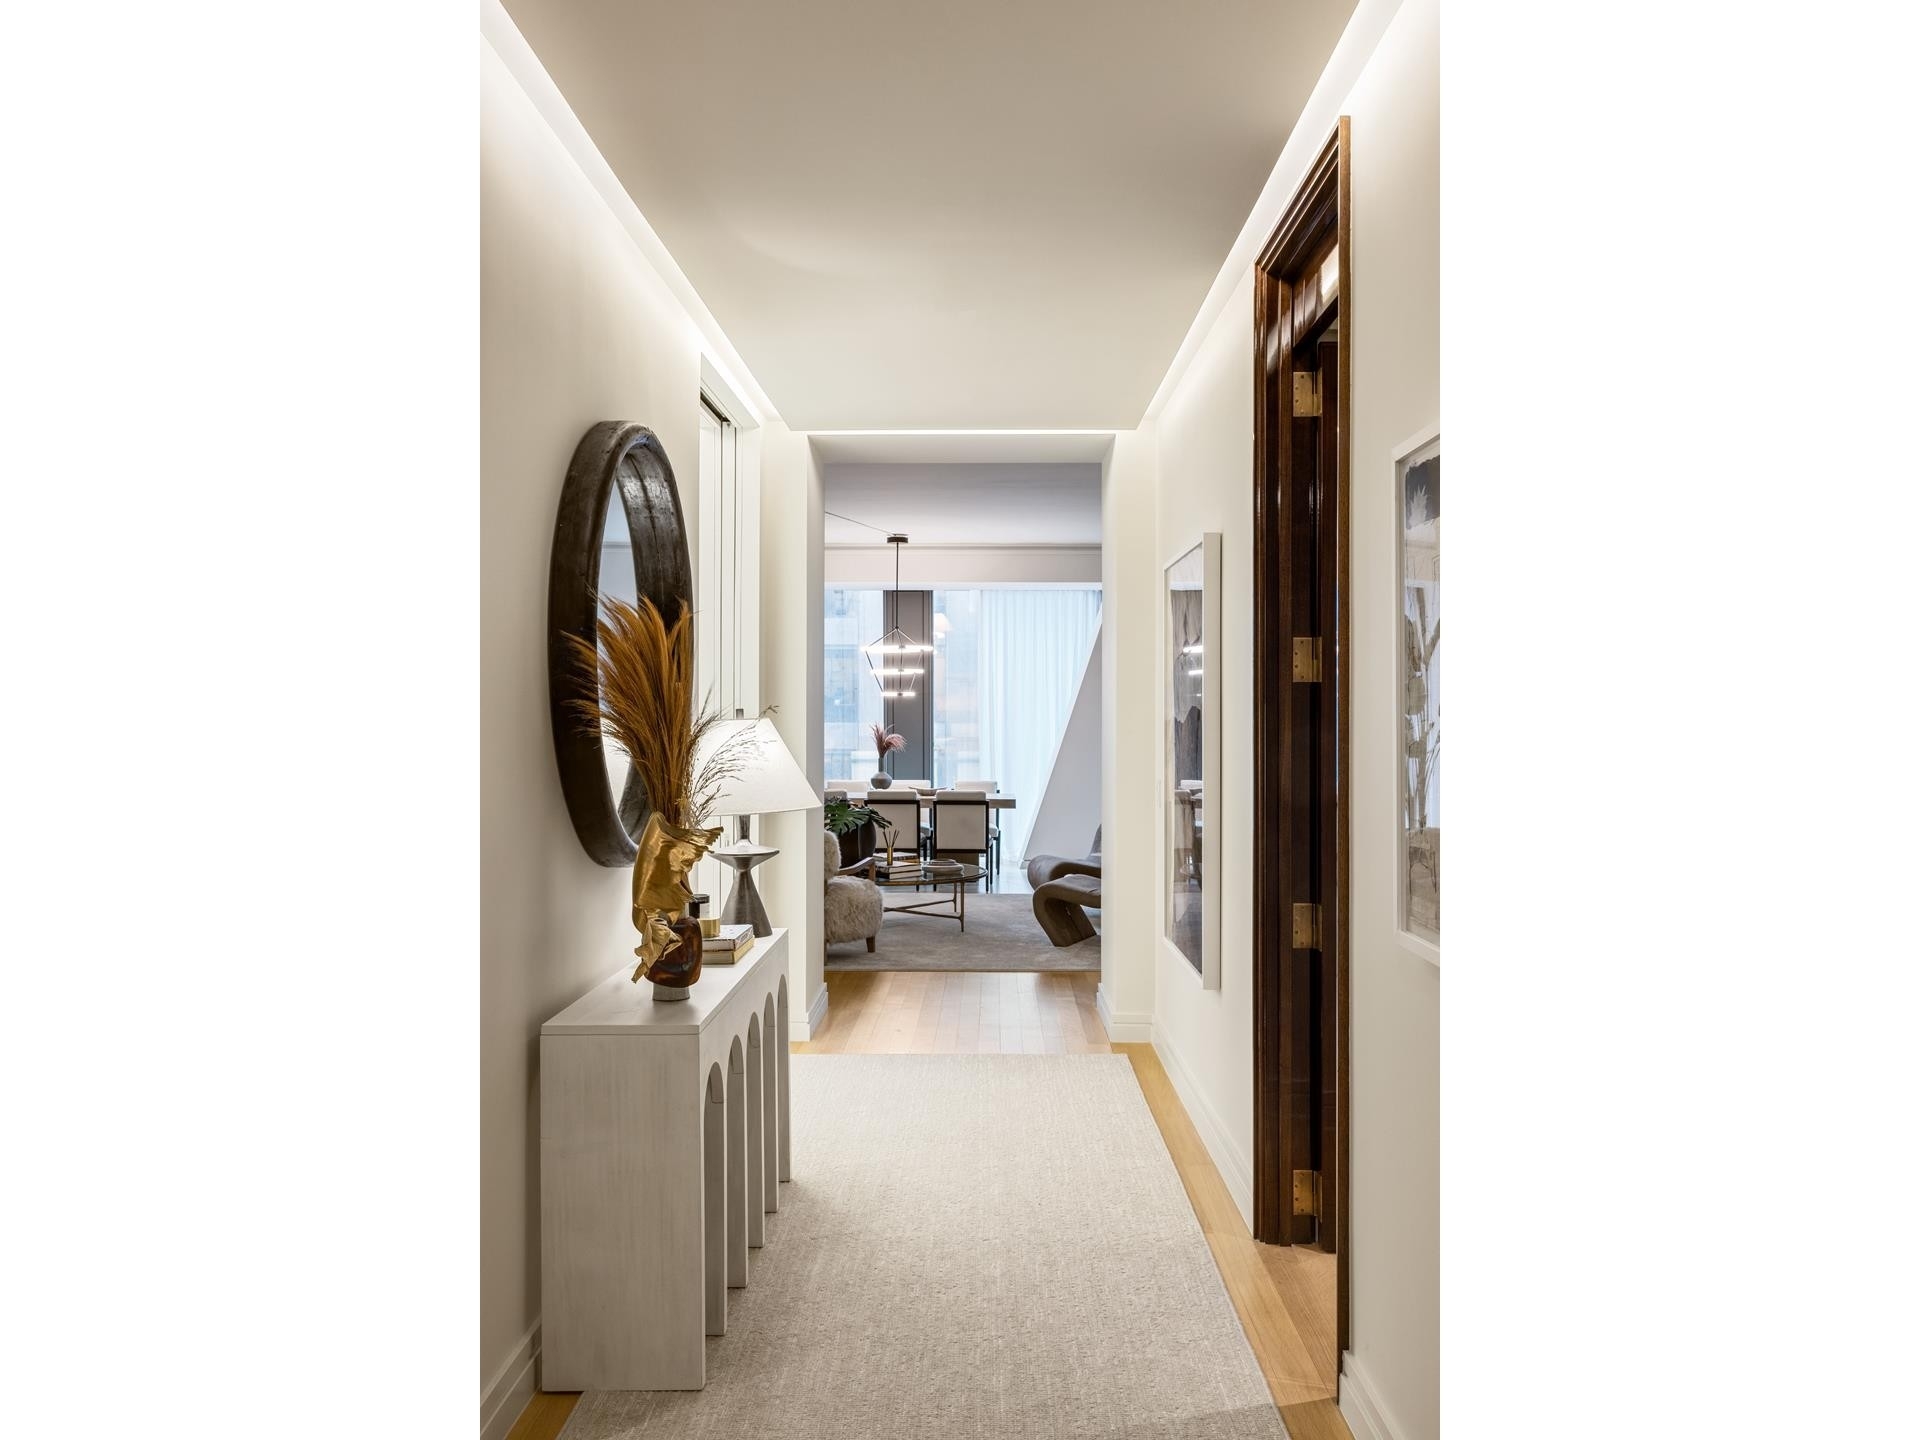 Condominium for Sale at 53W53, 53 53RD ST W, 28D Midtown West, New York, NY 10019